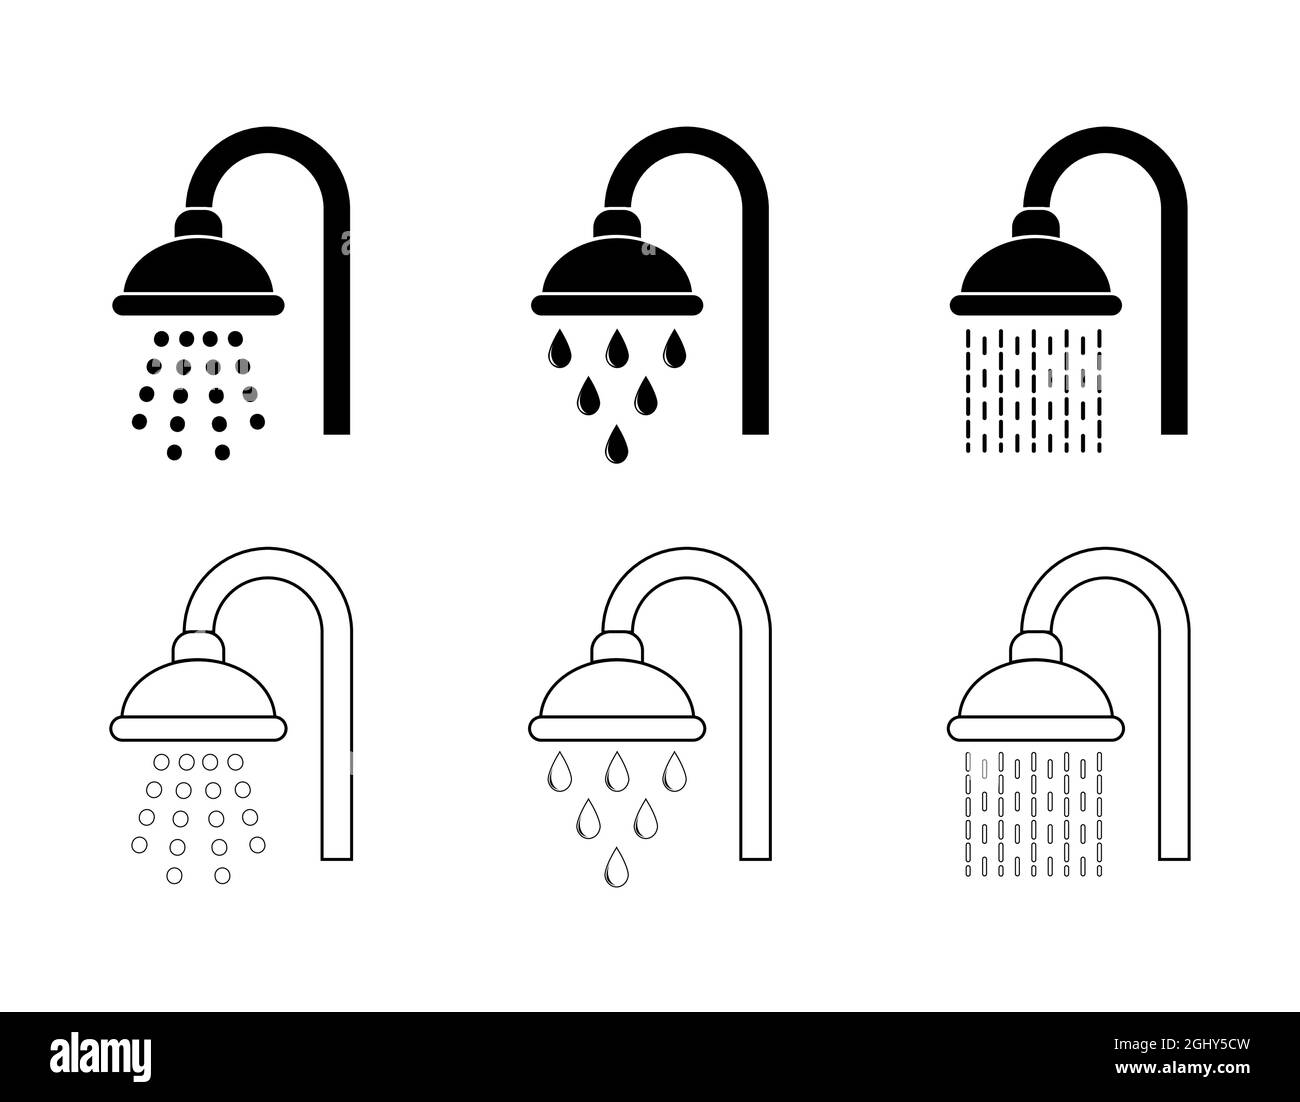 Shower icon. Bathroom symbol with water spray. Silhouette and outline design. Vector illustration isolated on white. Stock Vector